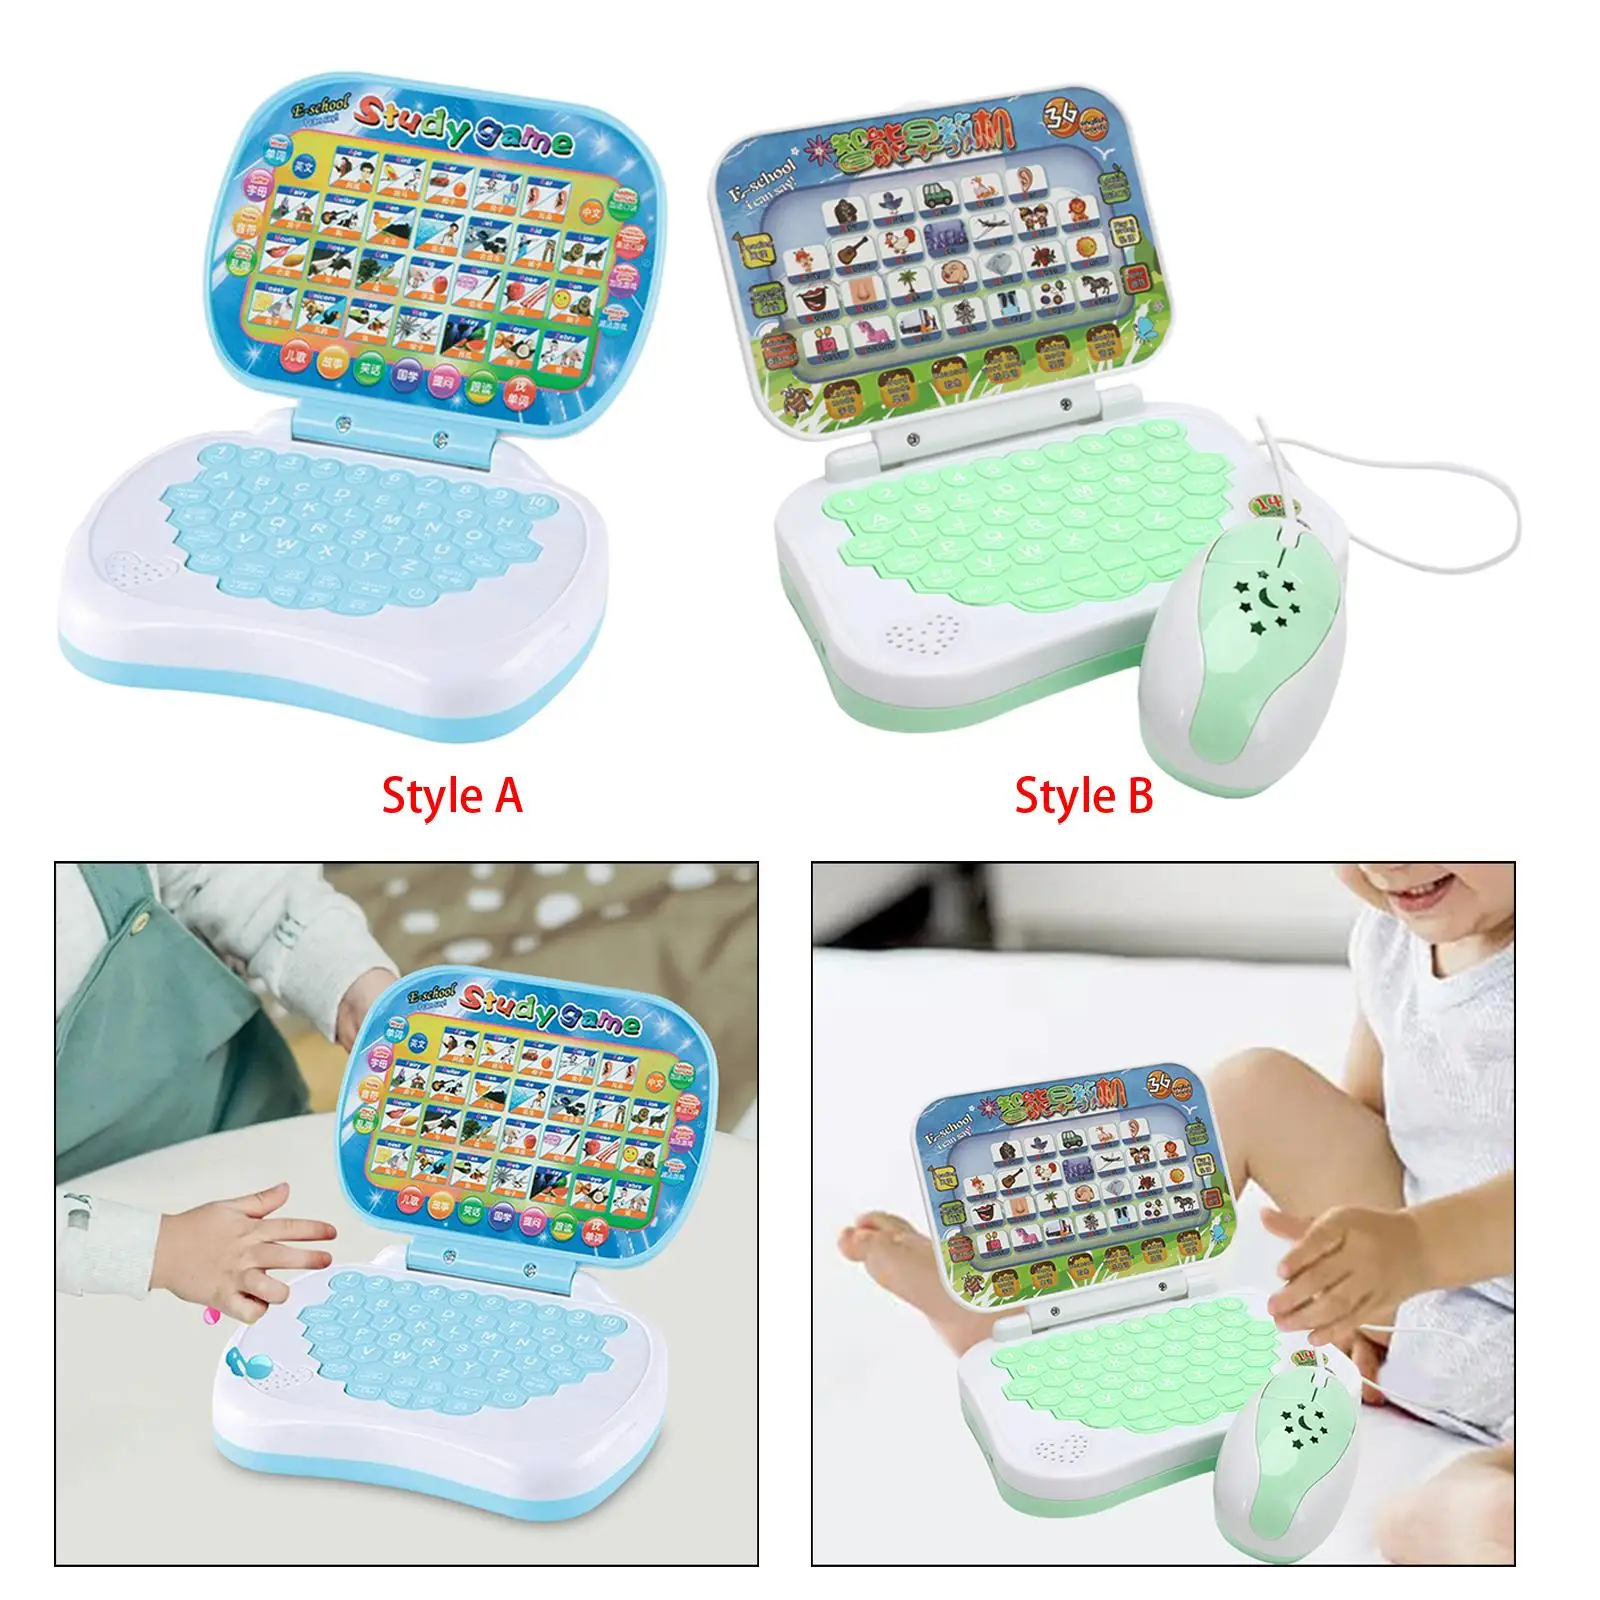 Handheld Language Learning Machine English Early Education Toy Computer Kids Laptop Toy for Children Kids Girls Boys